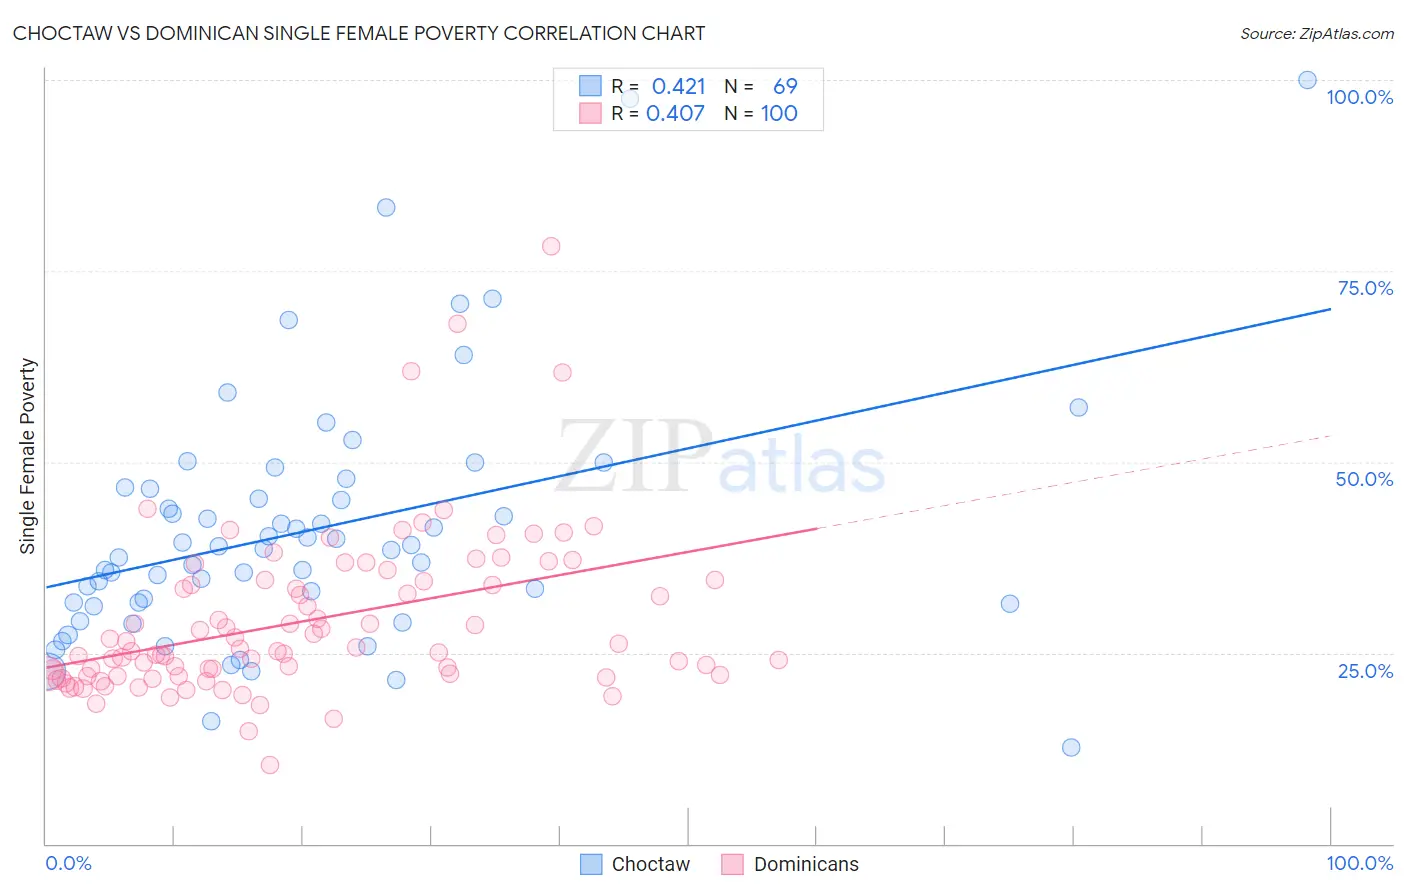 Choctaw vs Dominican Single Female Poverty